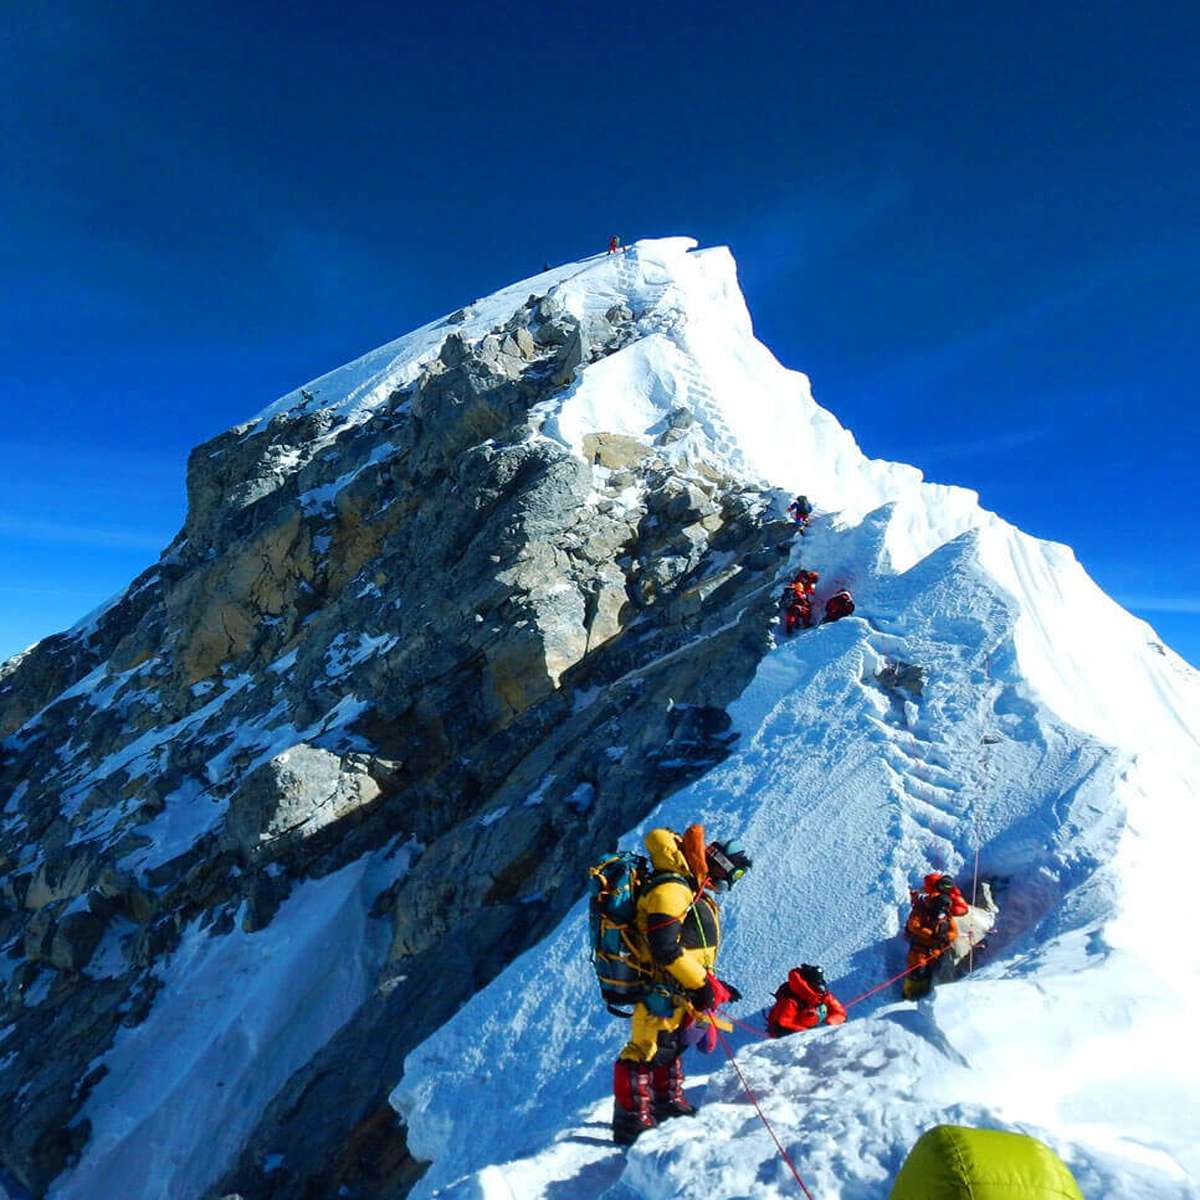 It's estimated that around this area of Mount Everest, there's about 150 to 200 dead bodies just scattered about.